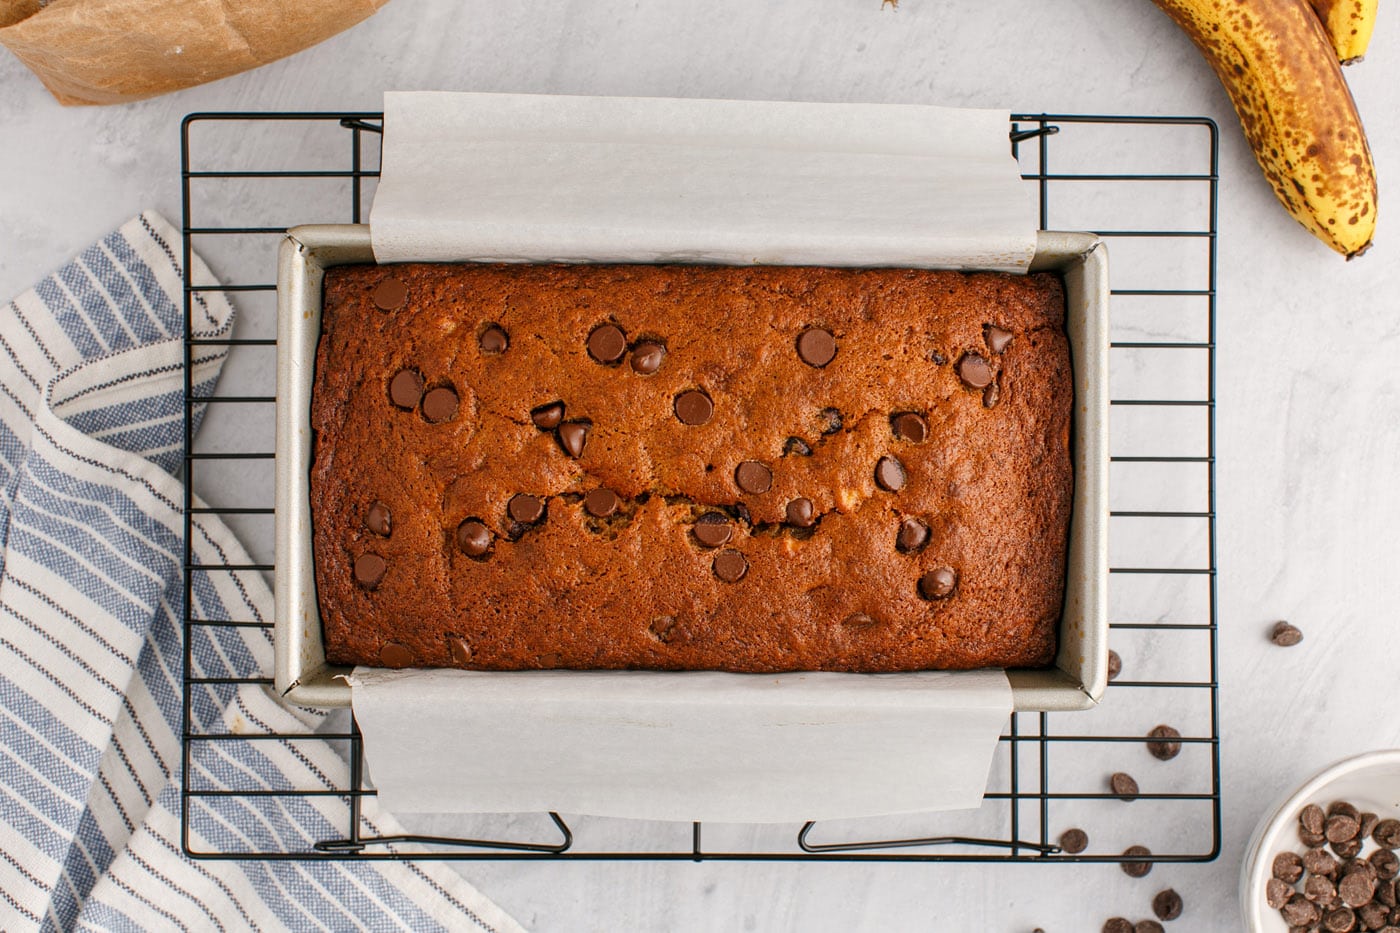 baked chocolate chip banana bread on a wire cooling rack